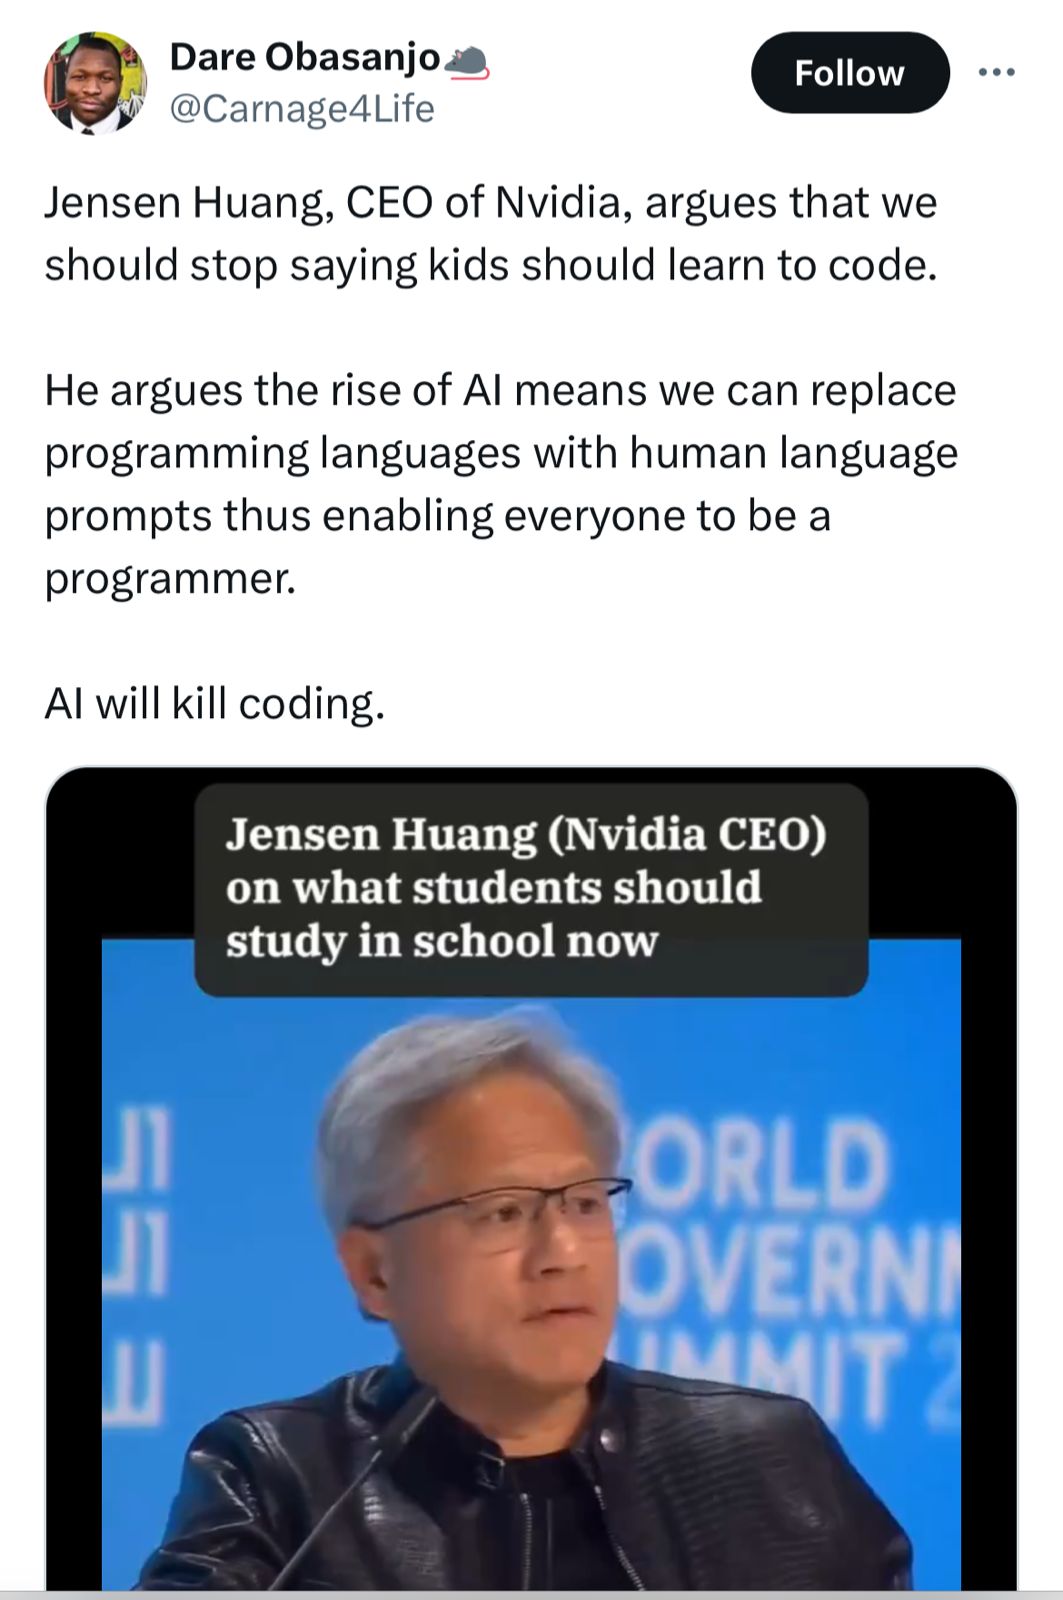 Nvidia CEO Jensen Huang suggests AI should take over coding, making traditional programming languages obsolete